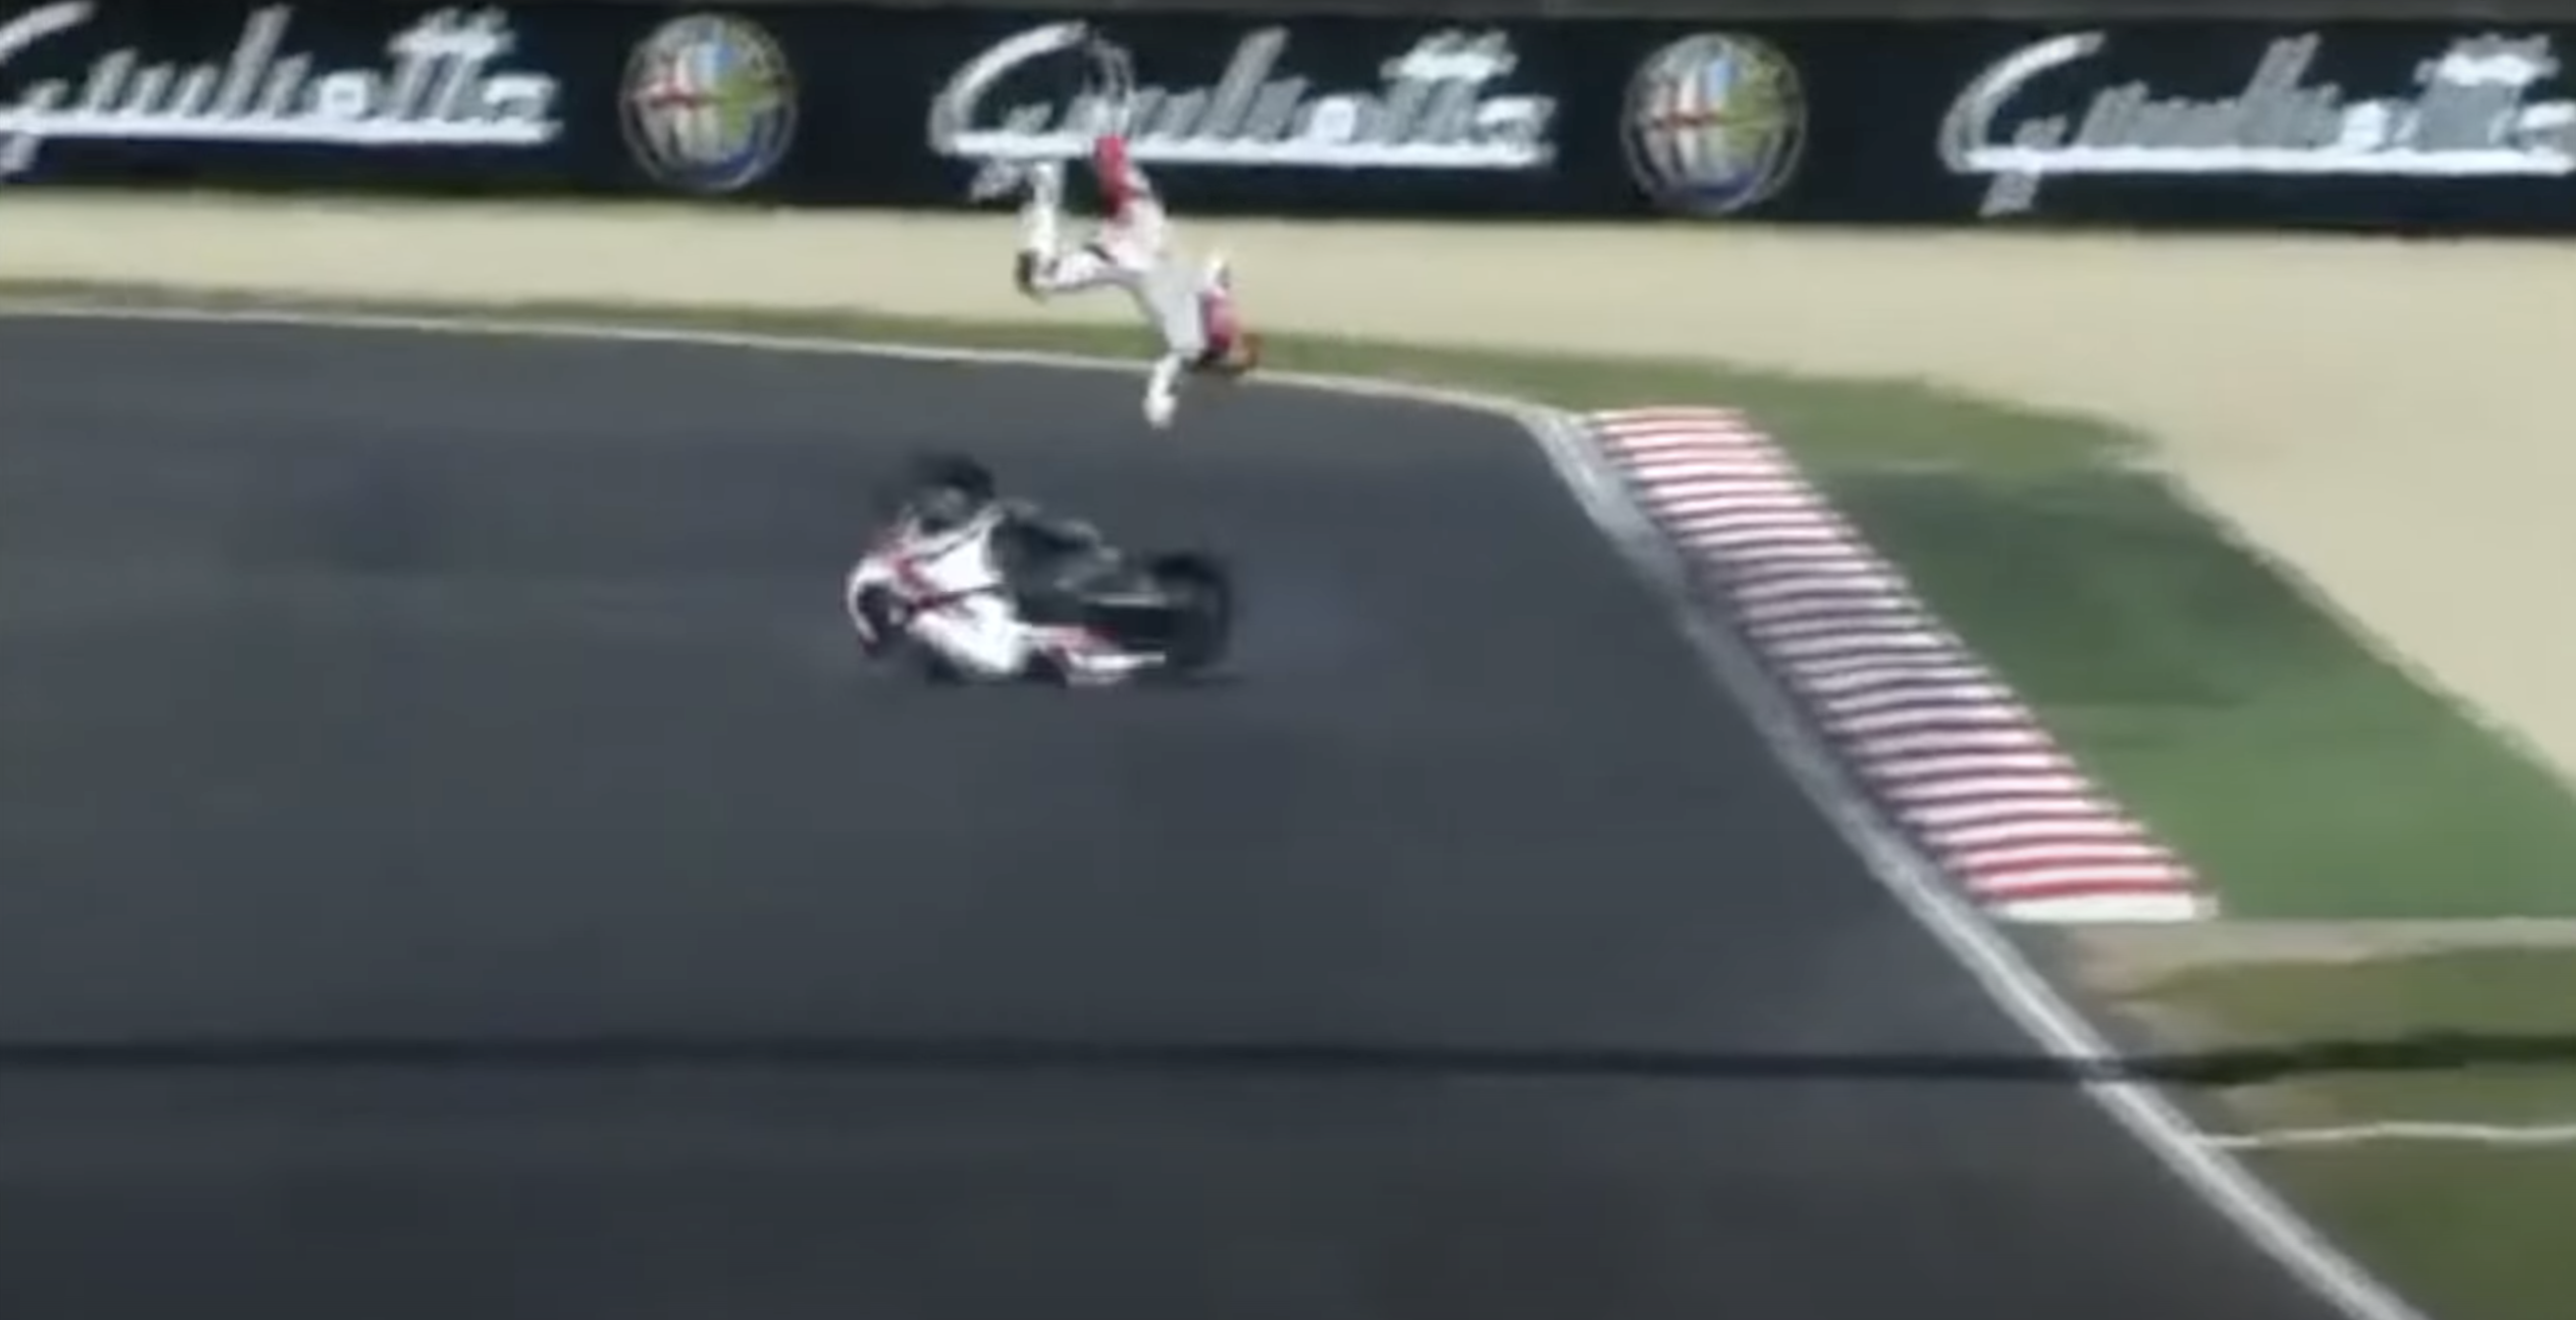 A view of Jonathan in 2013 at the WorldSbk qualifying, in a massive crash. 